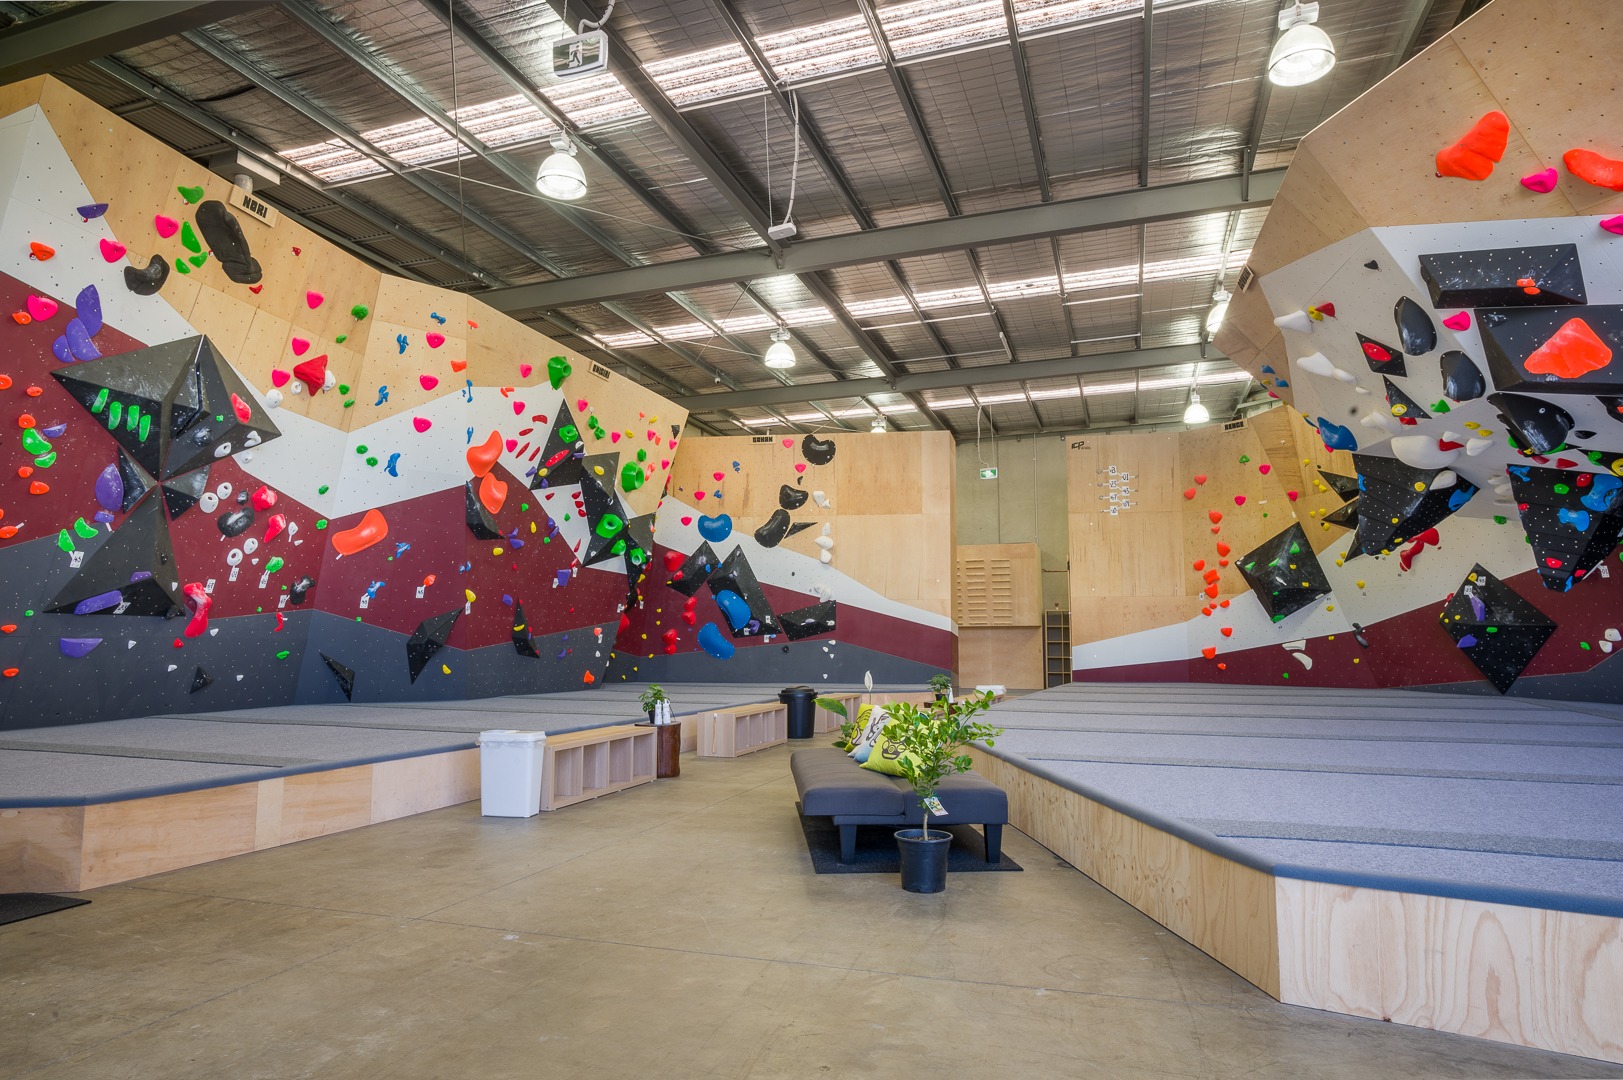 A bouldering gym with white, red and black paint work built by international climbing wall builder, ICP. The walls are filled with various colourful holds and volumes.